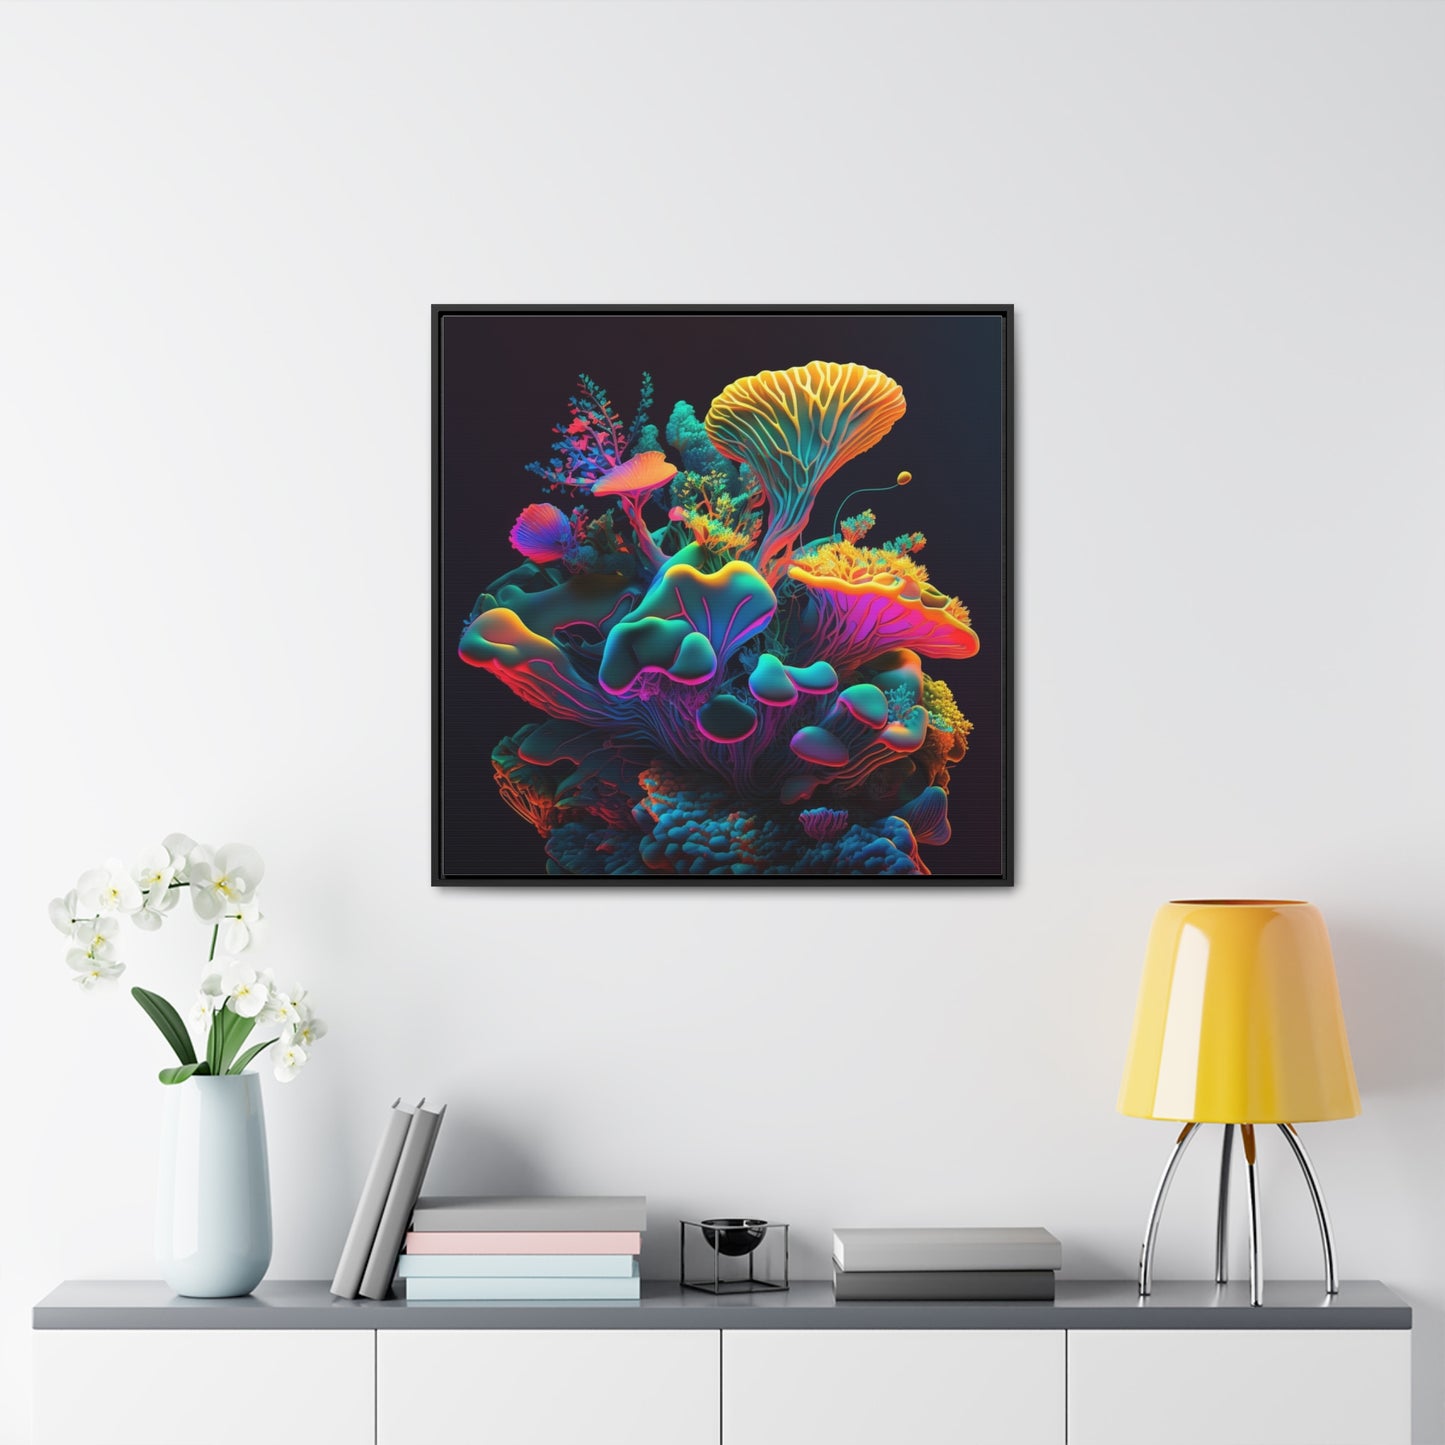 Gallery Canvas Wraps, Square Frame Macro Coral Reef 1